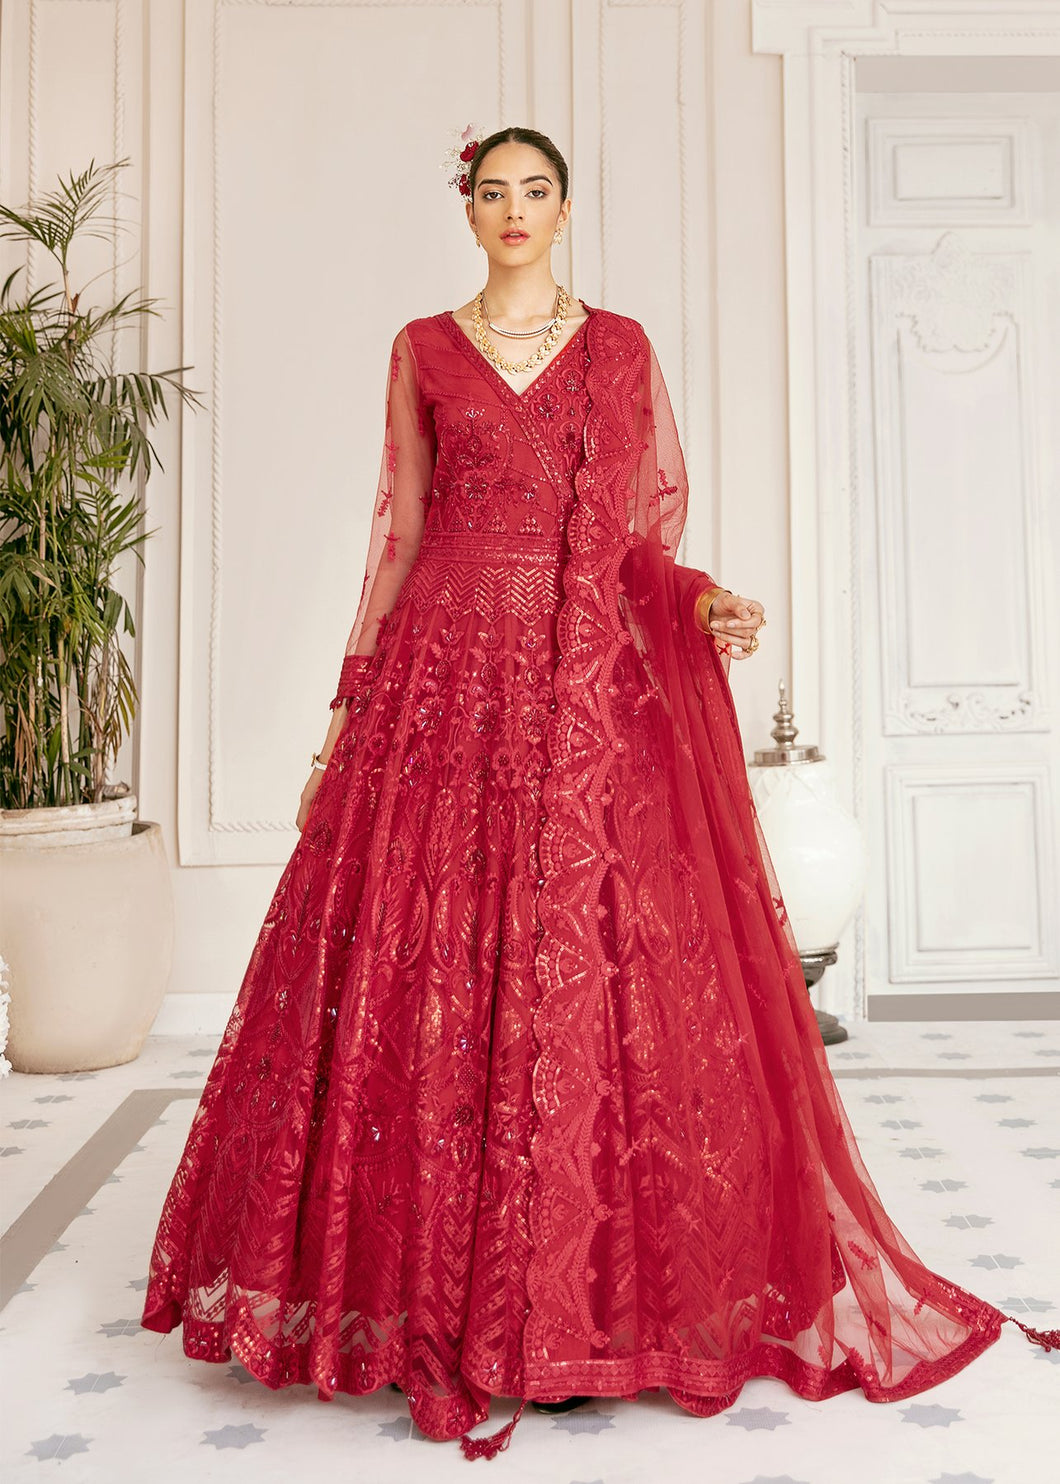 Buy Akbar Aslam Wedding Formal Collection 2021 ALTAIR Red Dress at amazing prices. Buy republic womenswear, casual wear, Maria b lawn 2021 luxury original dresses, fully stitched at UK & USA with extremely fine embroidery, Evening Party wear, Gulal Wedding collection from LebaasOnline - PAKISTANI Clothes SALE’ 21